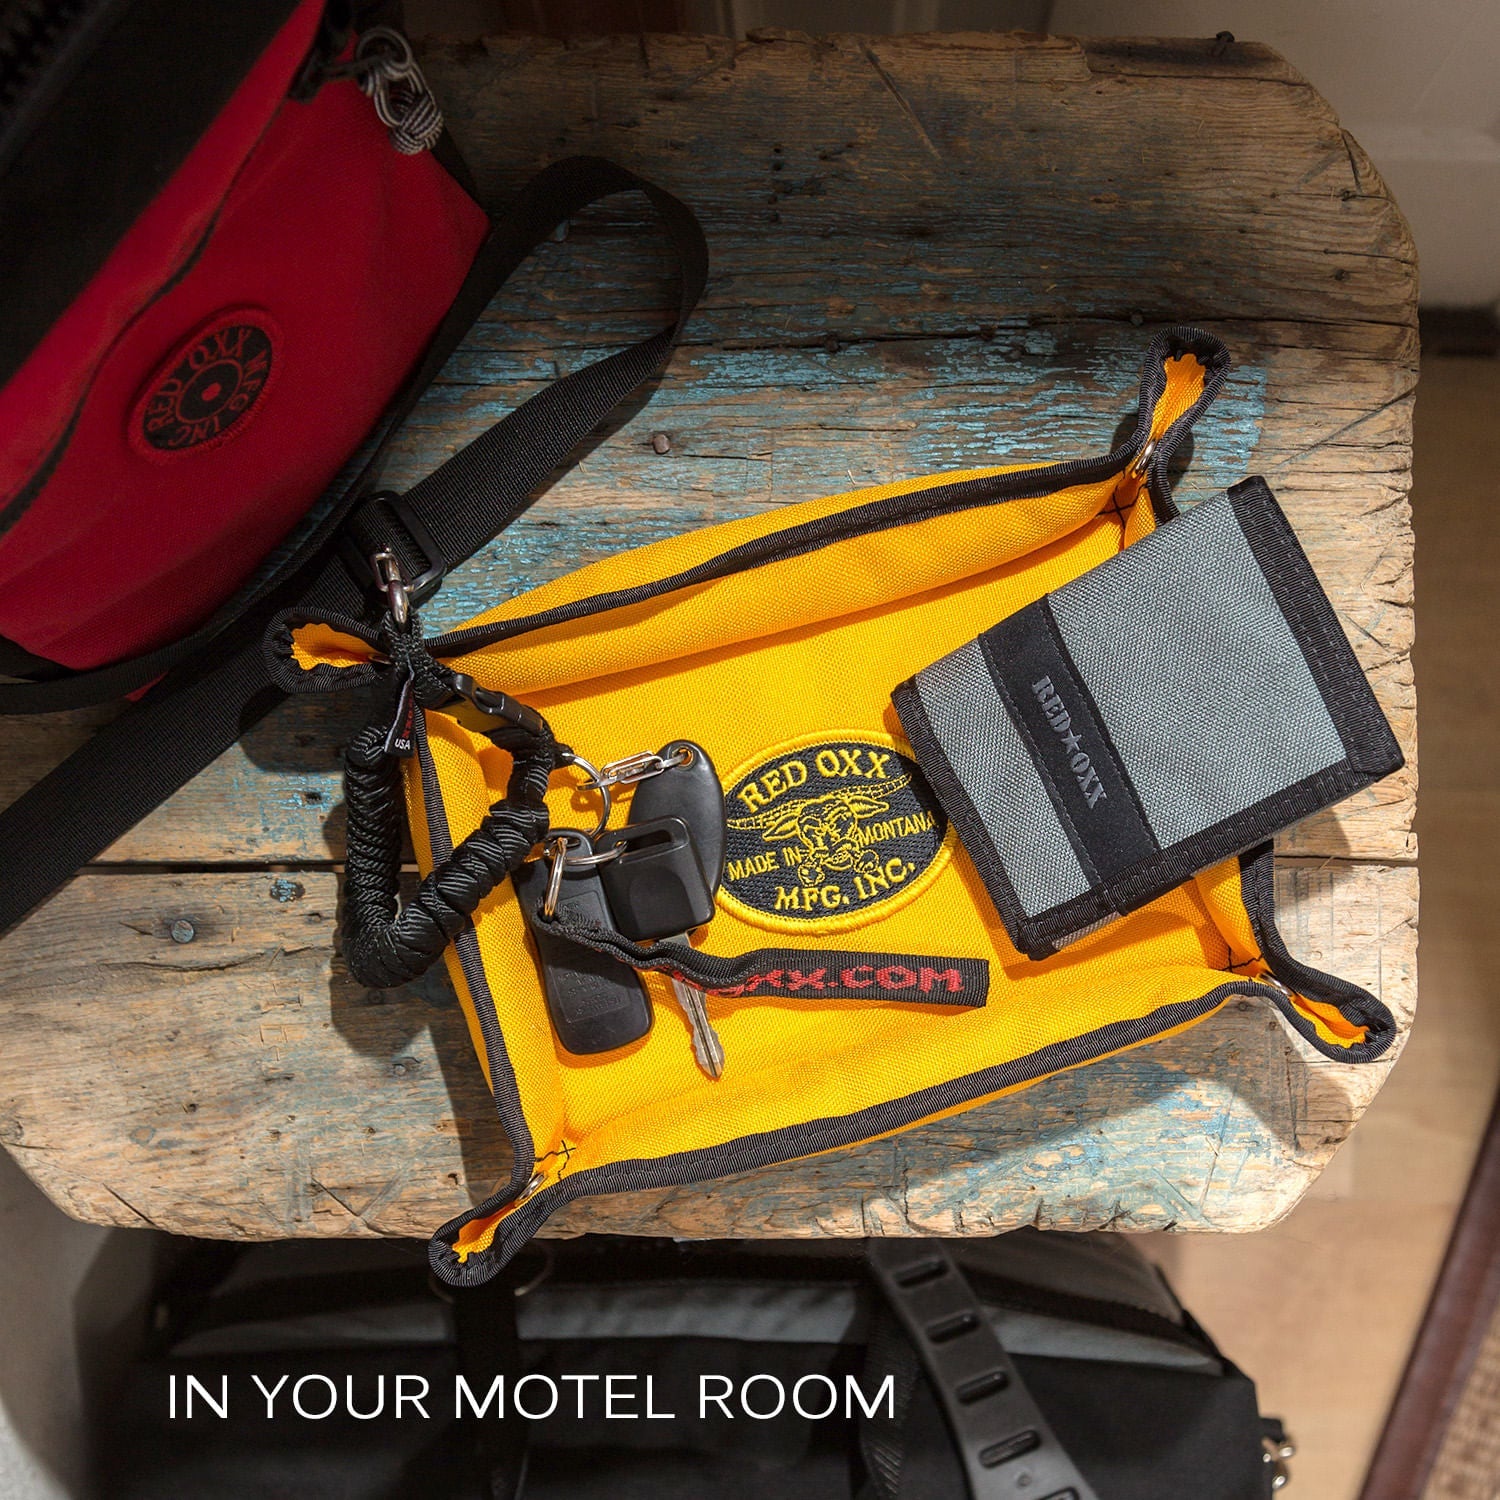 Travel Tray is great for your motel room.   Keys and Rigger wallet.